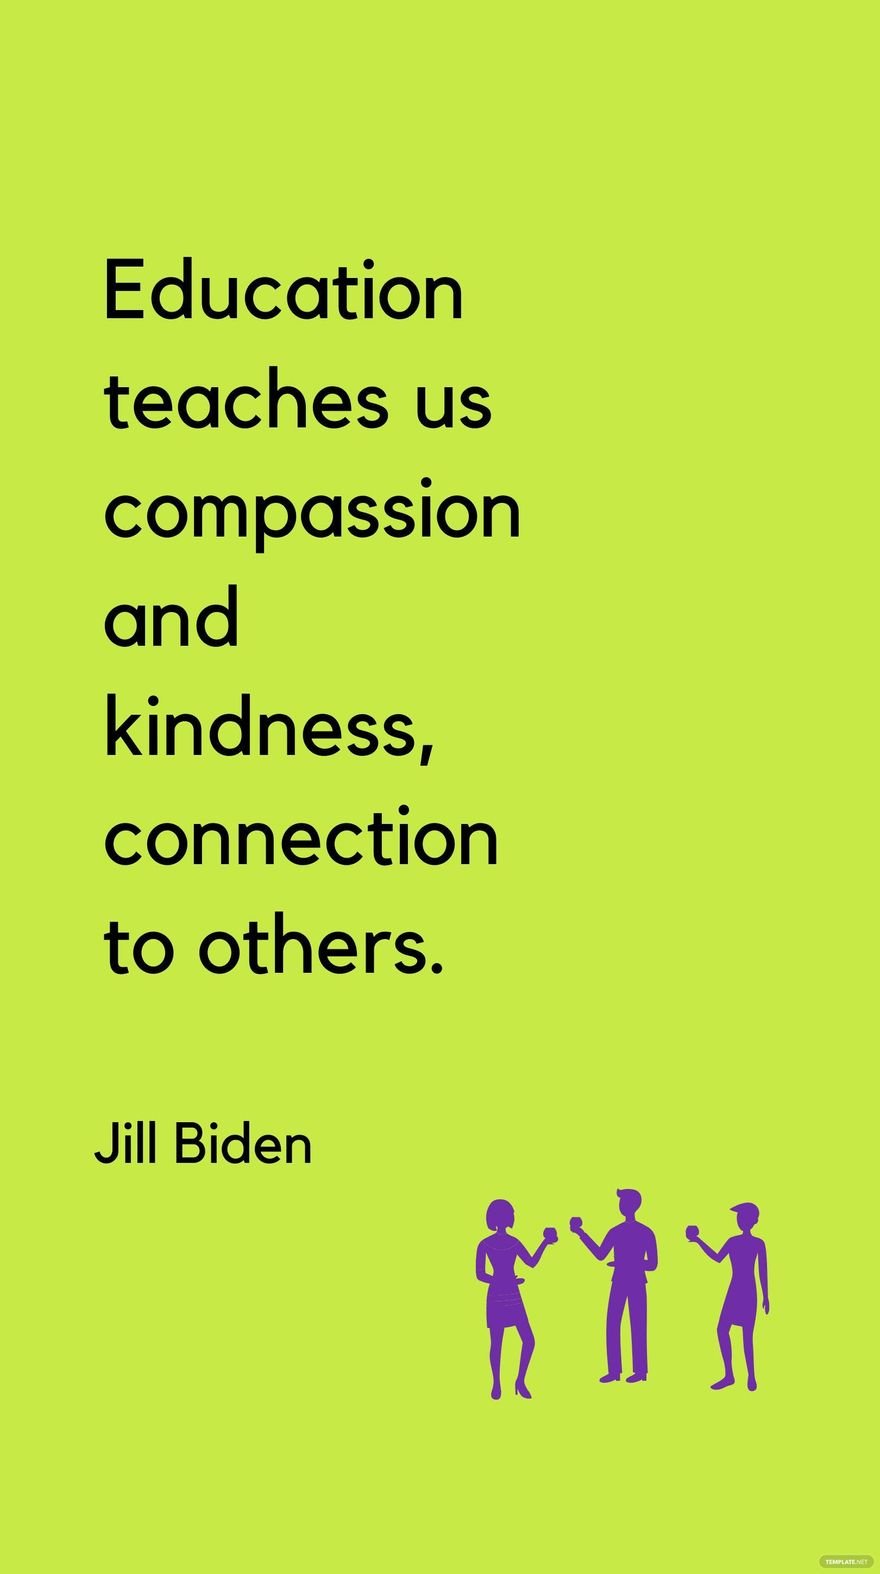 Jill Biden - Education teaches us compassion and kindness, connection to others.